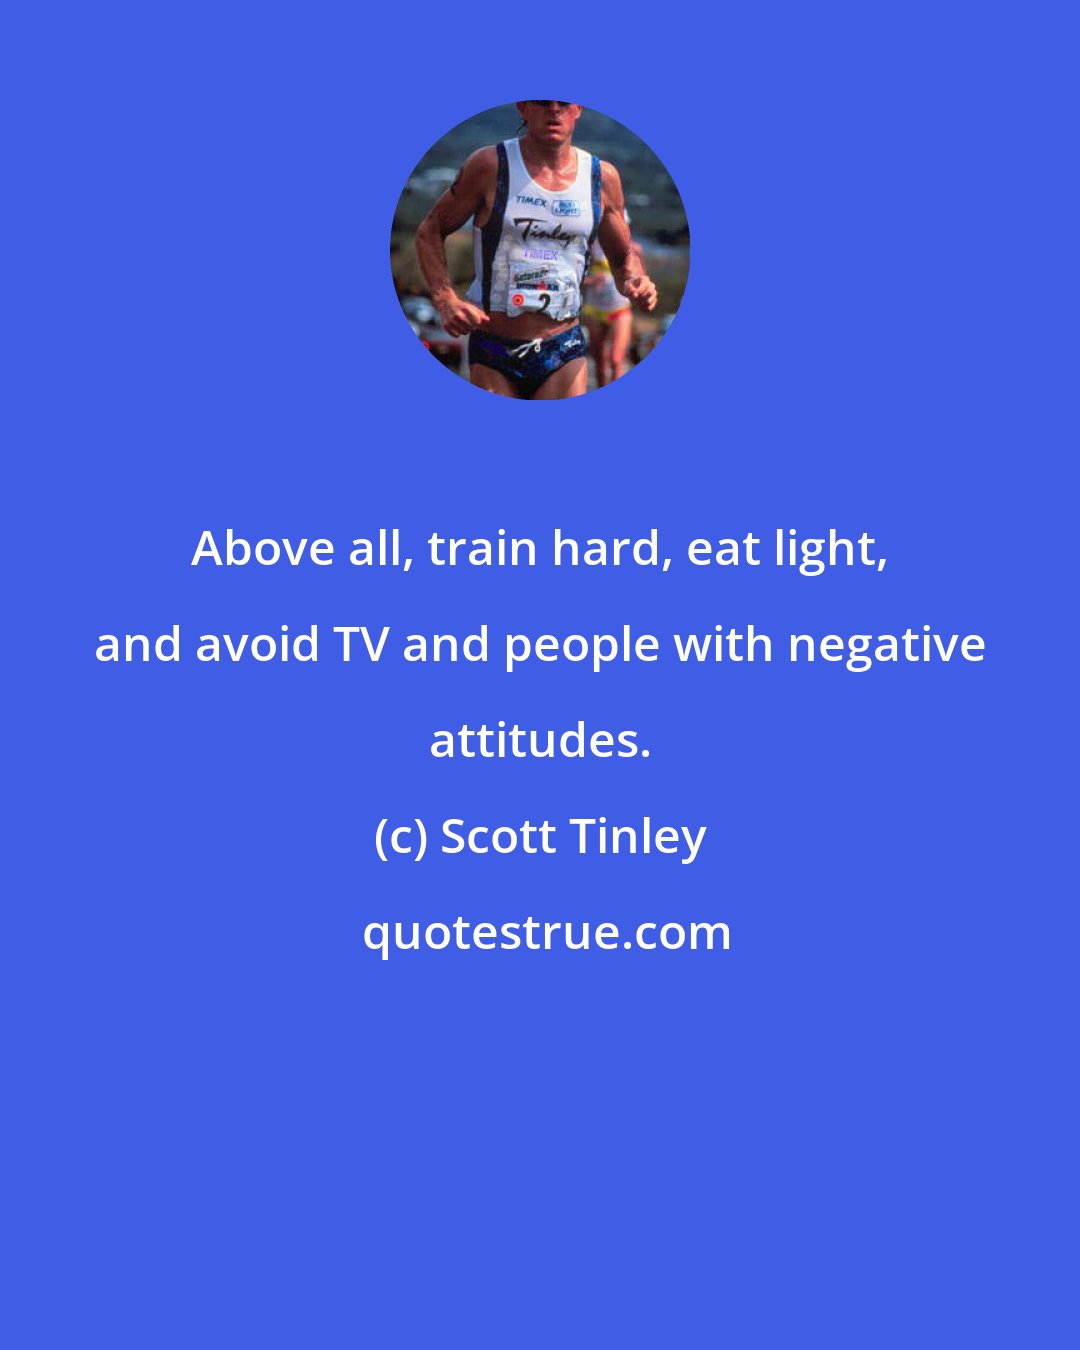 Scott Tinley: Above all, train hard, eat light, and avoid TV and people with negative attitudes.